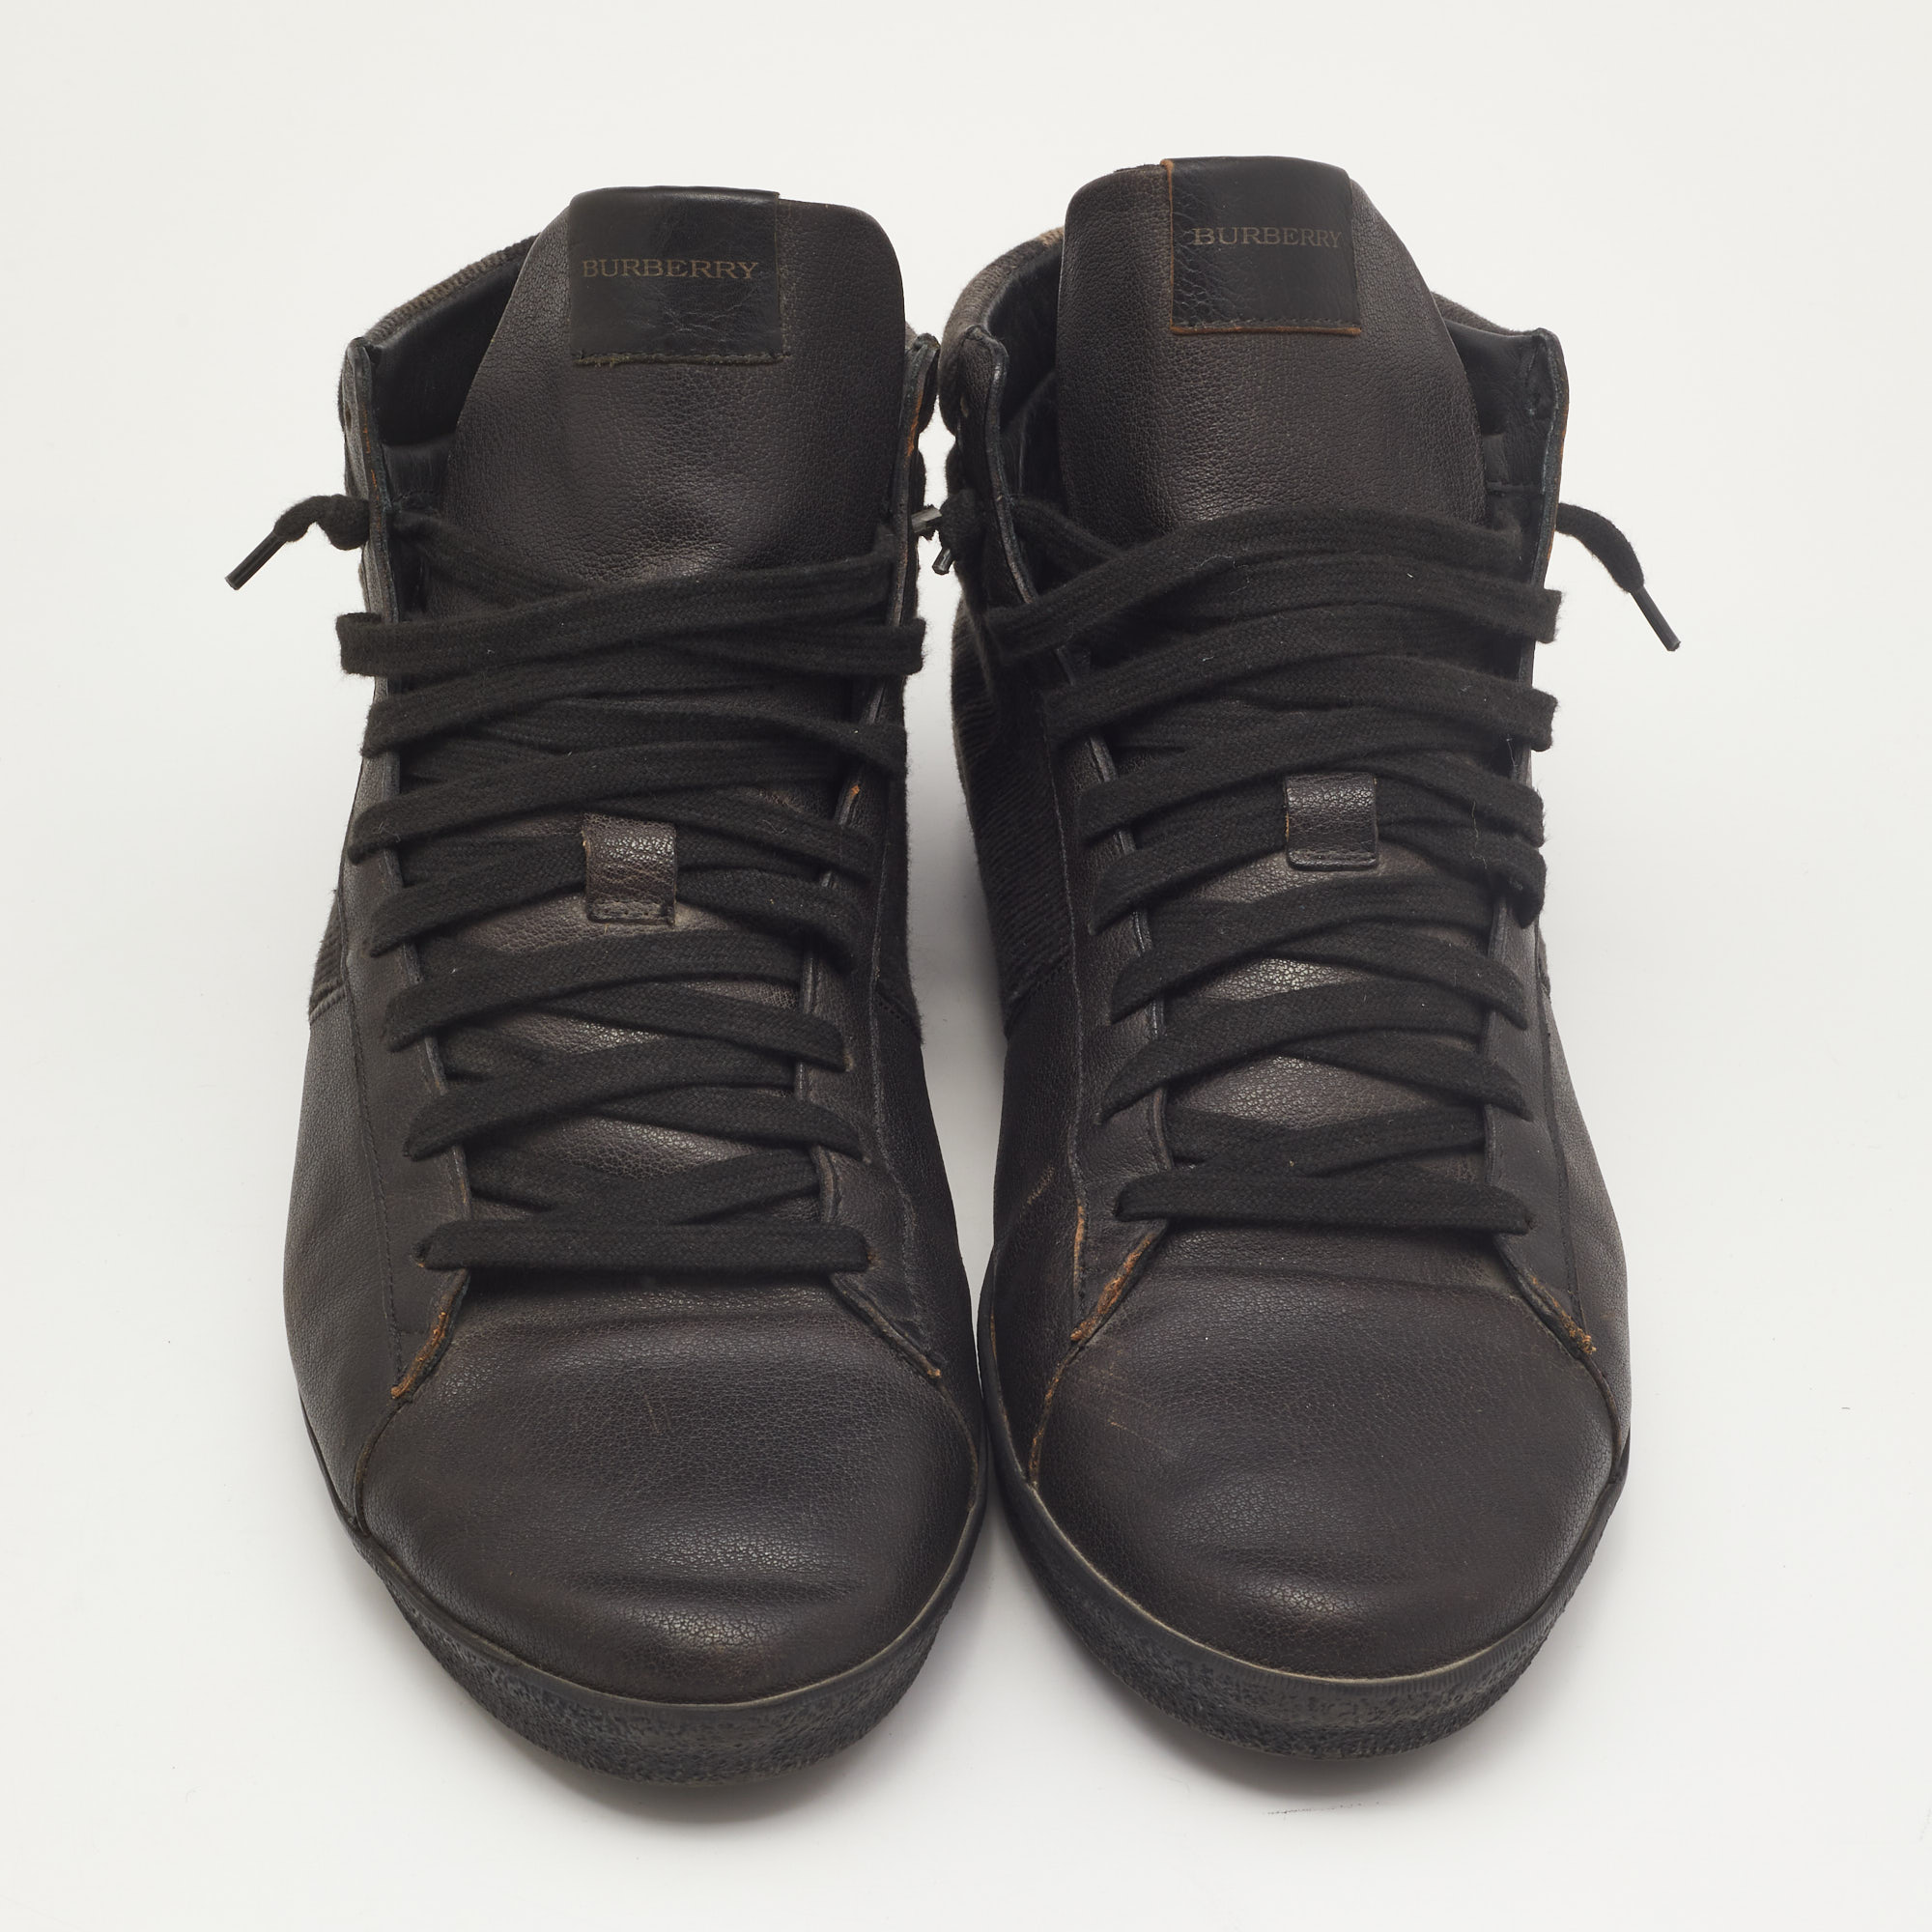 Burberry Black Leather And Check Canvas High Top Sneakers Size 44